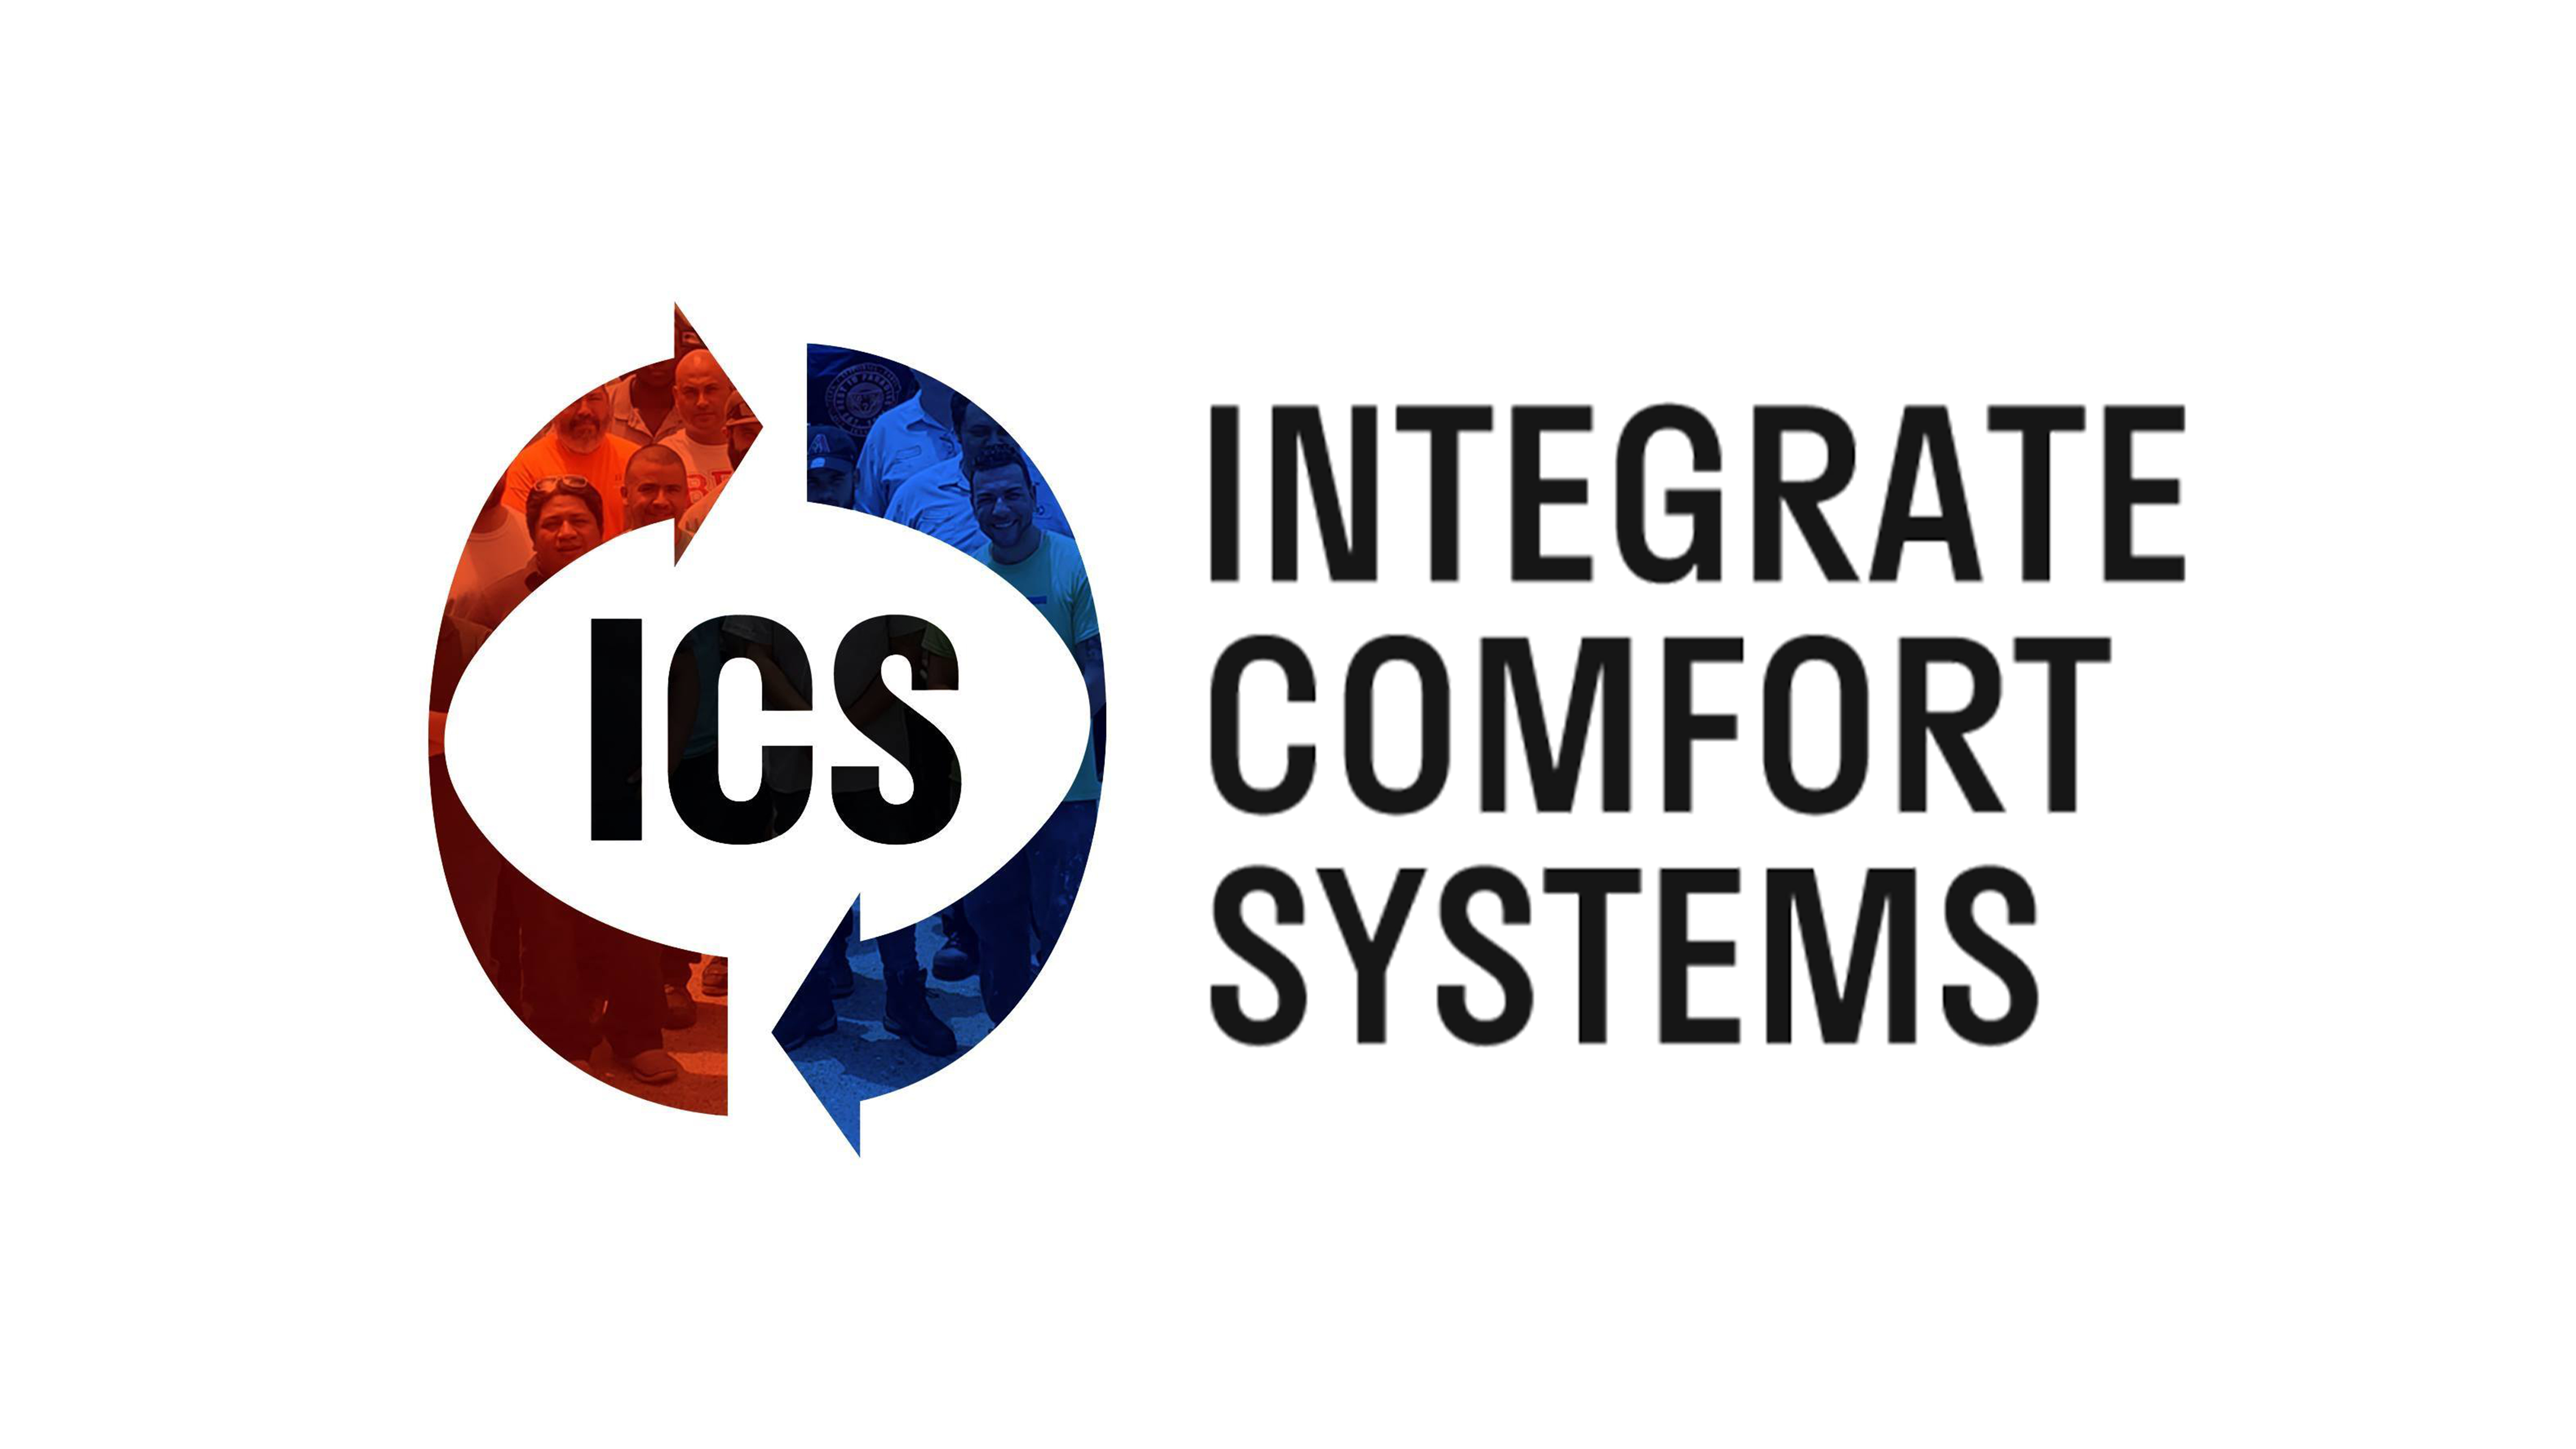 Integrate Comfort Systems - Leave a Review